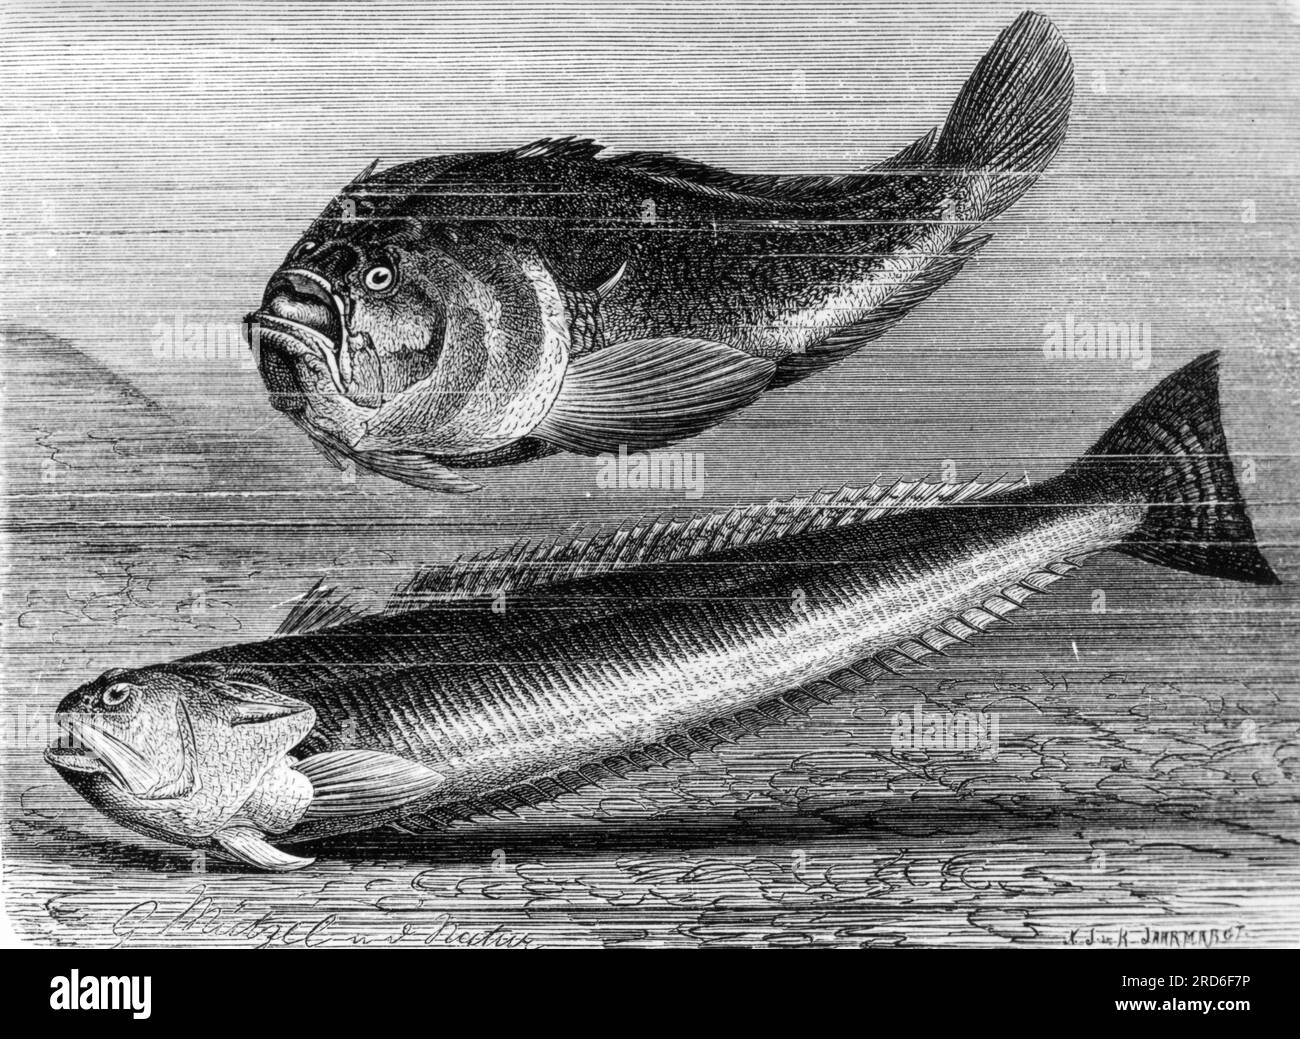 zoology / animals, fishes, Atlantic stargazer (Uranoscopus scaber) and Greater weever (Trachinus draco), ARTIST'S COPYRIGHT HAS NOT TO BE CLEARED Stock Photo